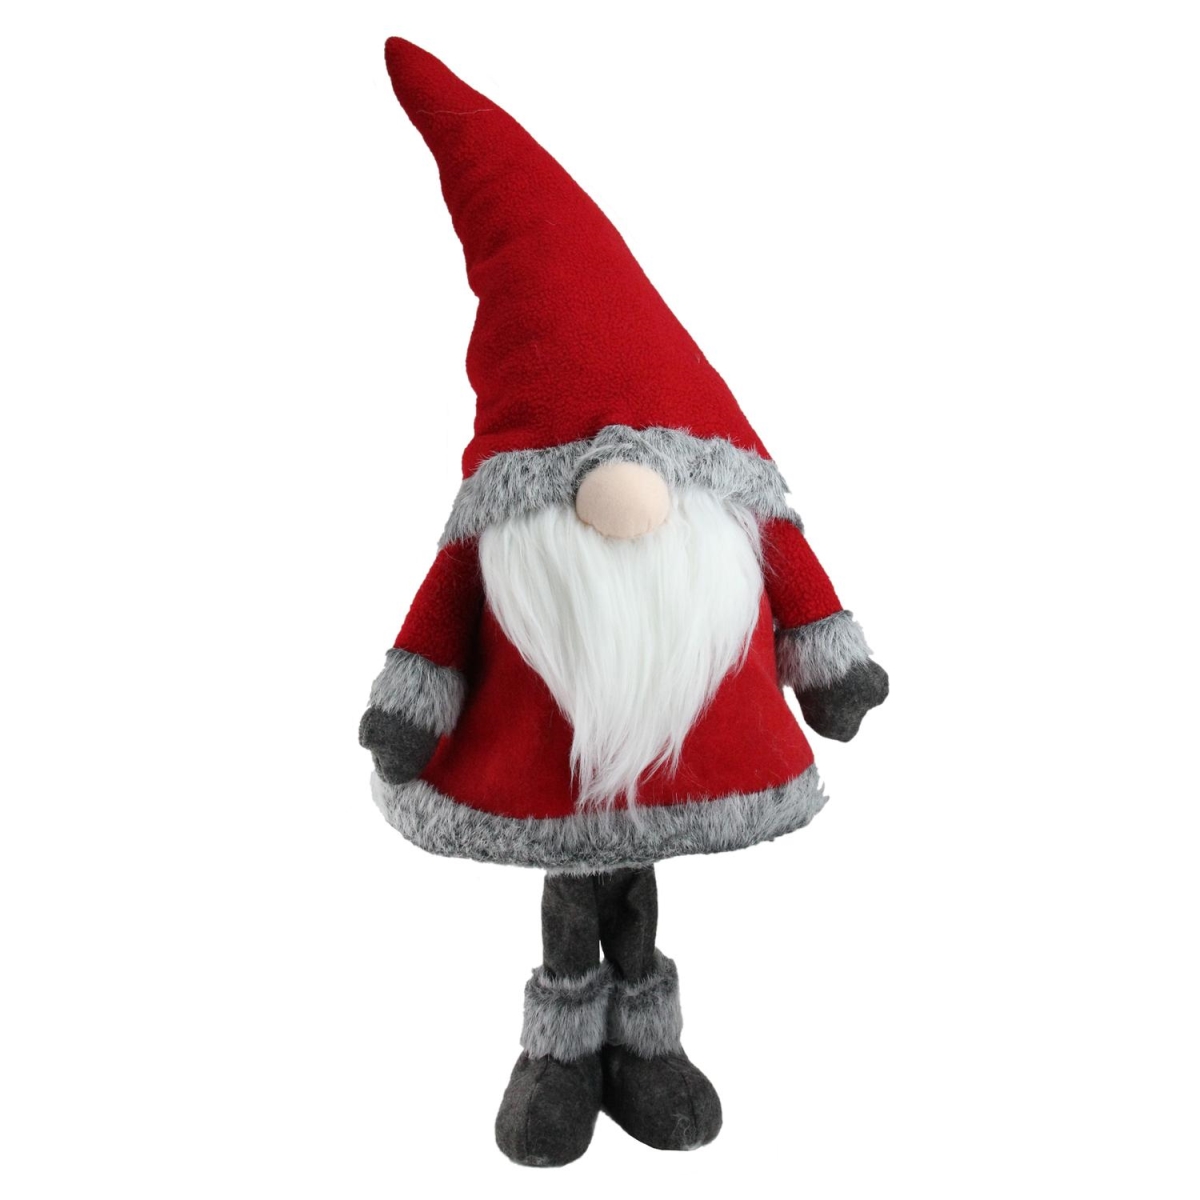 32632807 30 In. Red Standing Christmas Santa Claus Gnome With Gray Faux Fur Trim